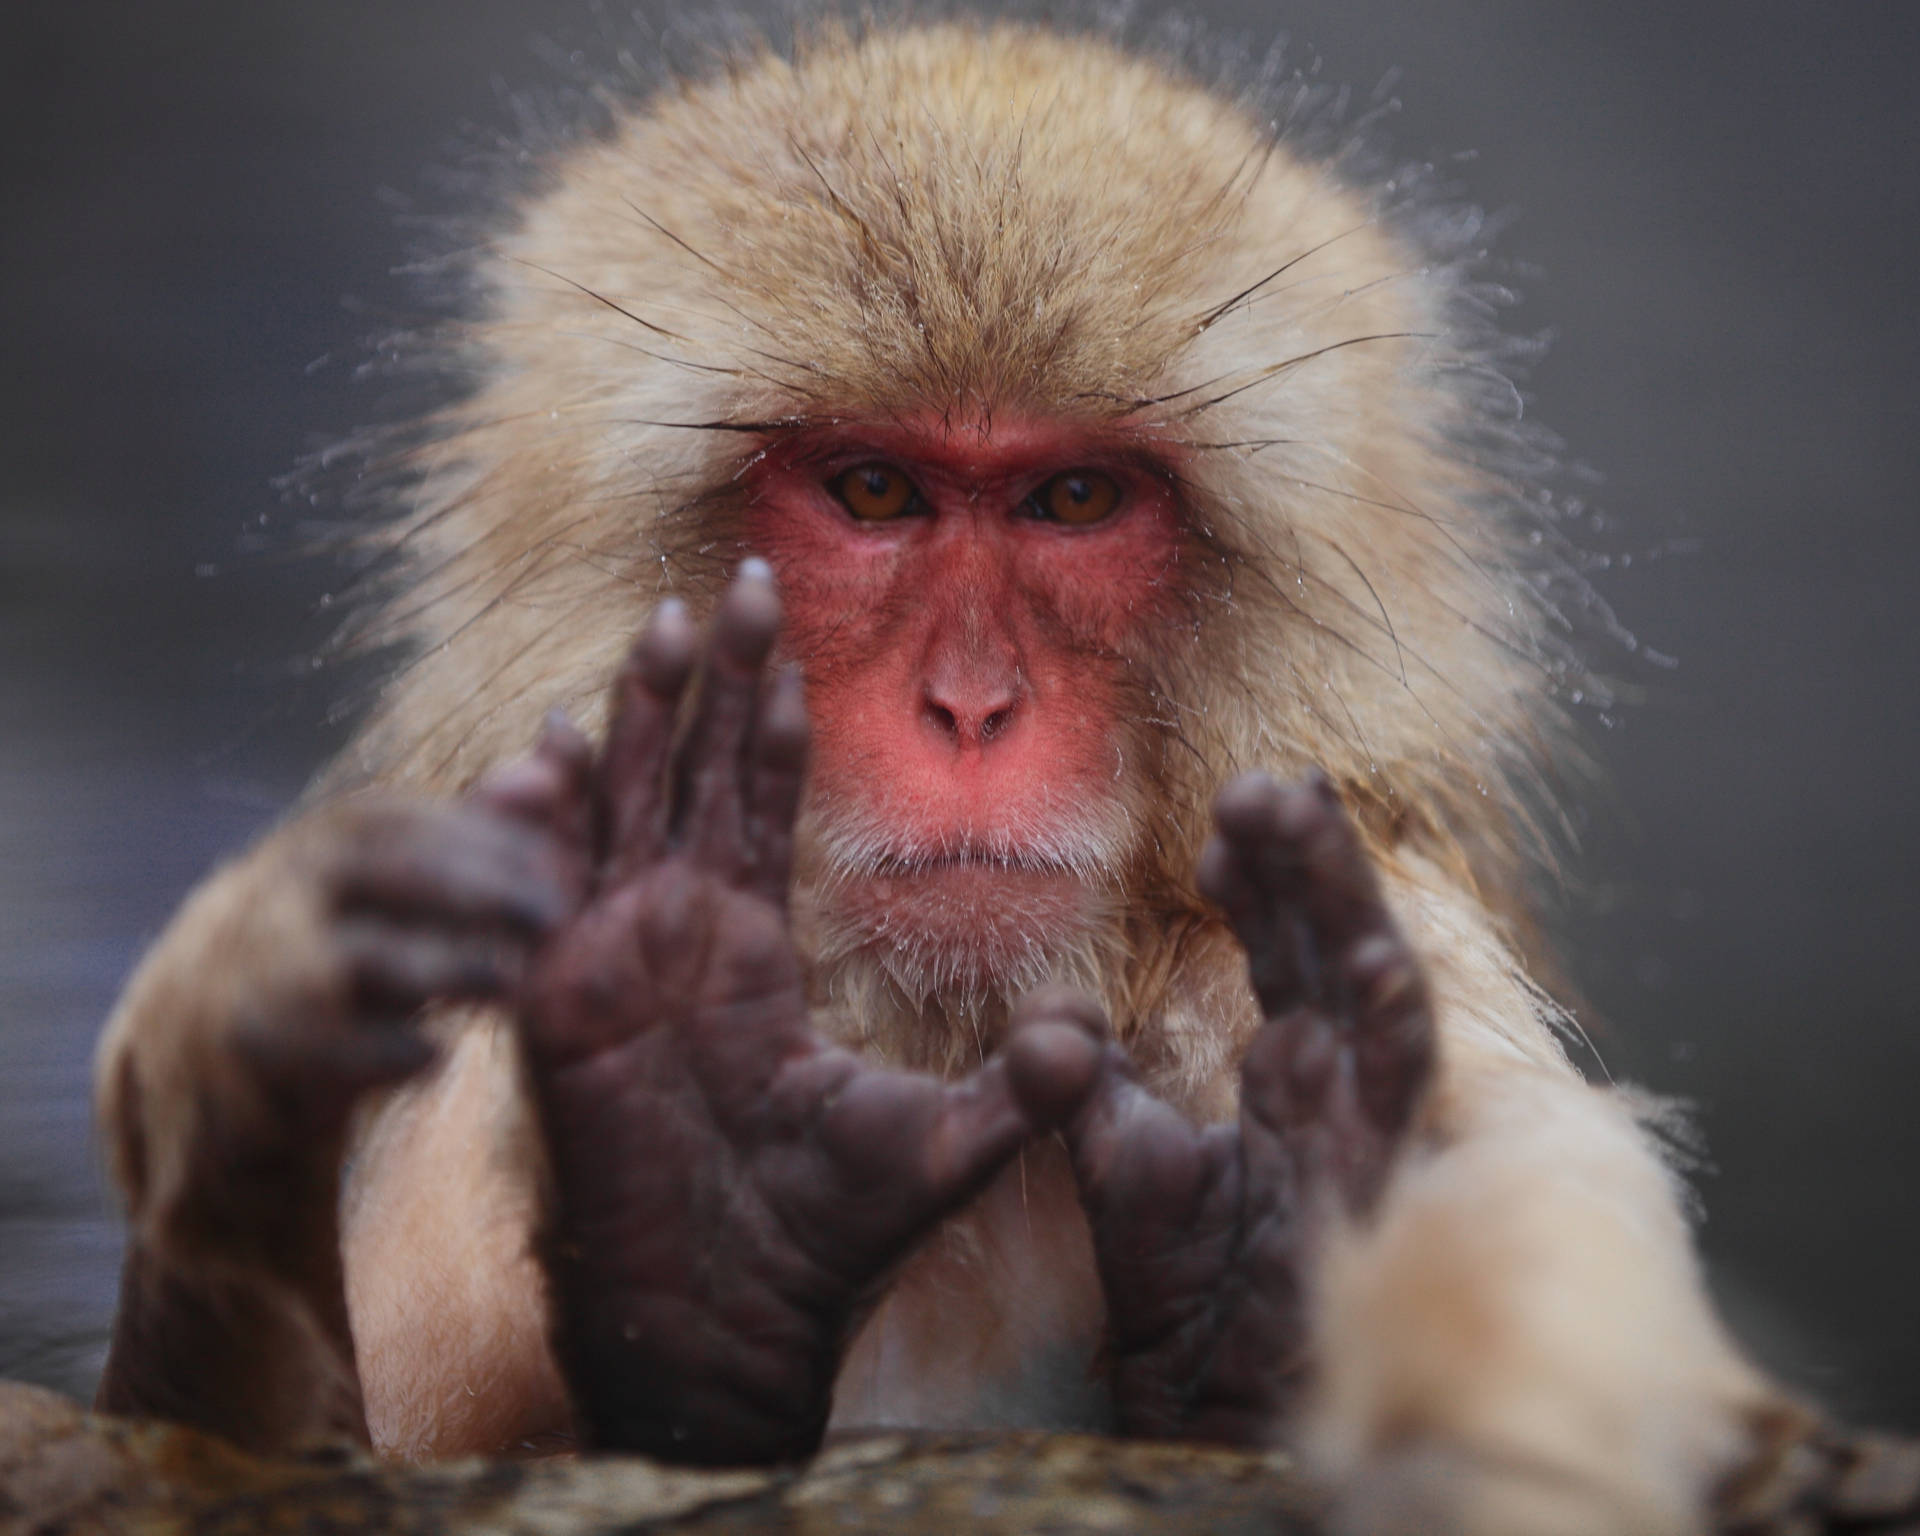 "This Japanese red-faced macaque has an inquisitive expression" Wallpaper